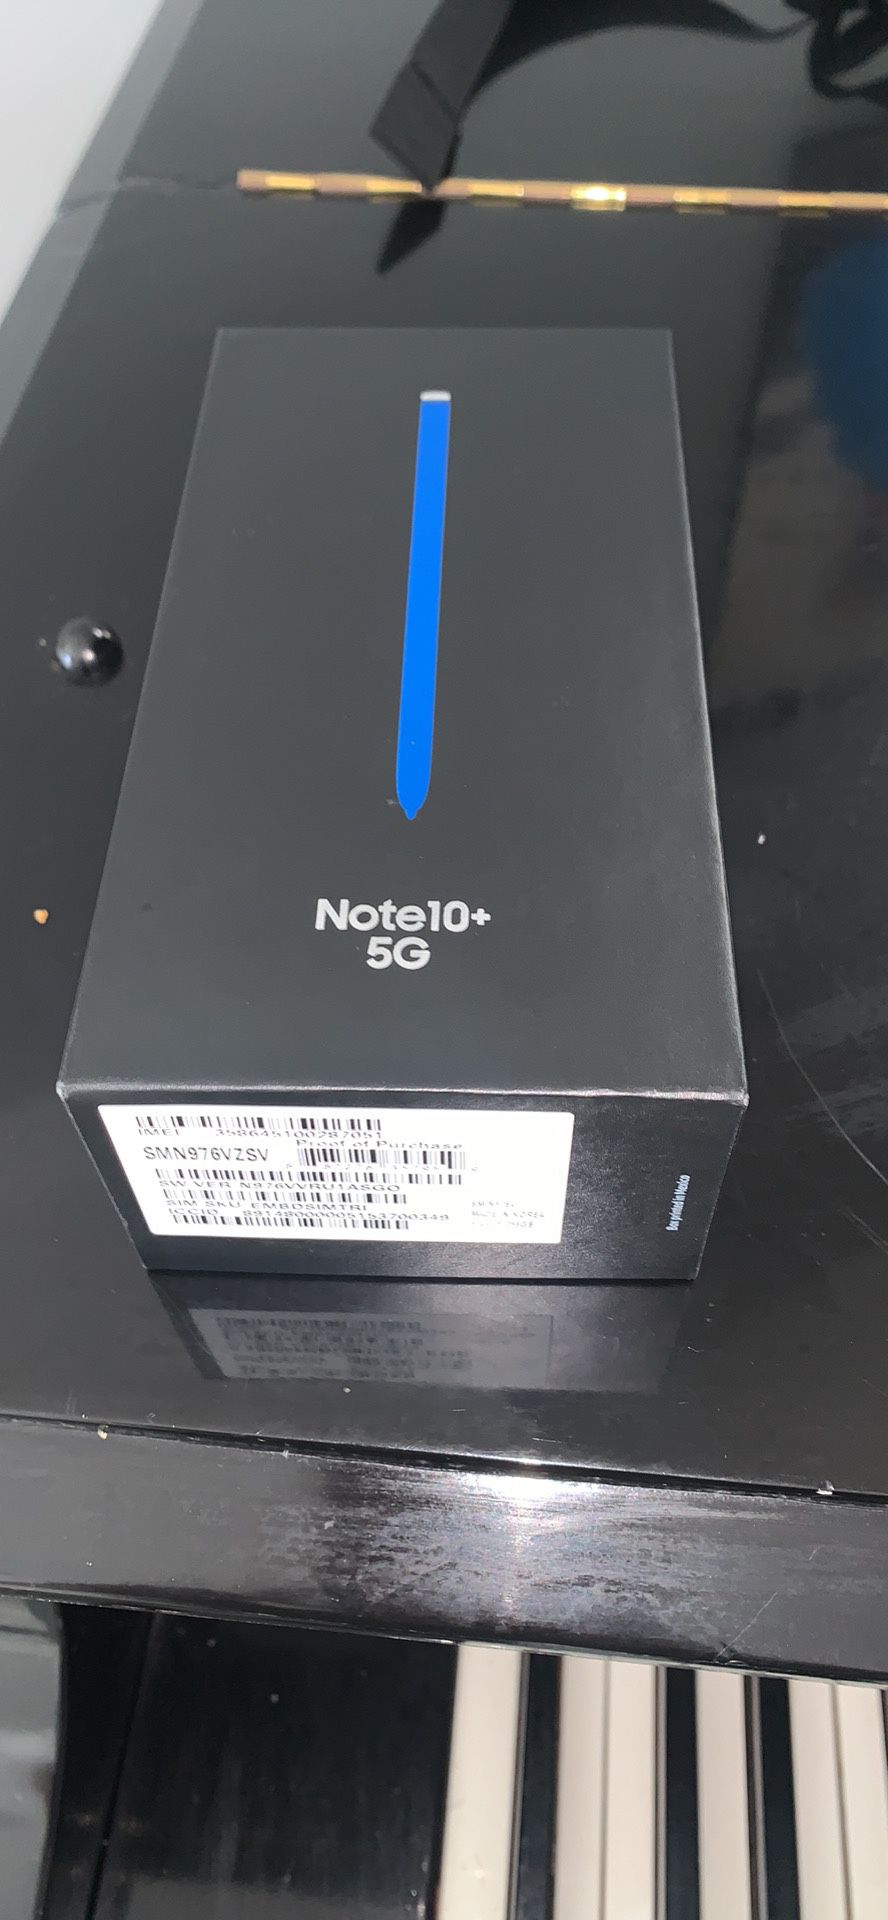 Galaxy note 10+ especial edition like new